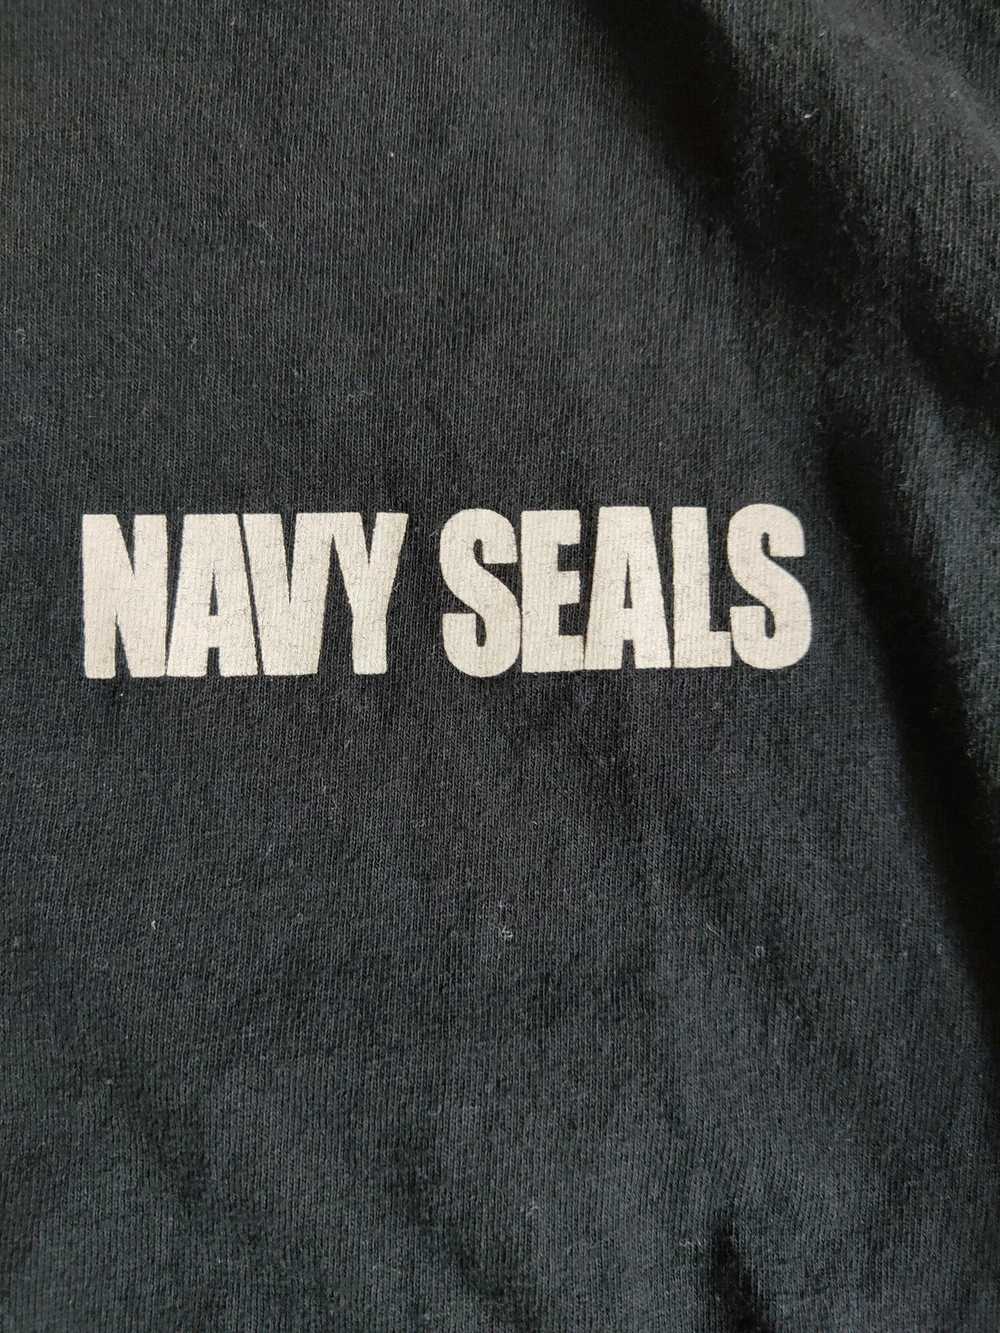 Other Navy Seals "We got your six" Tee - image 3